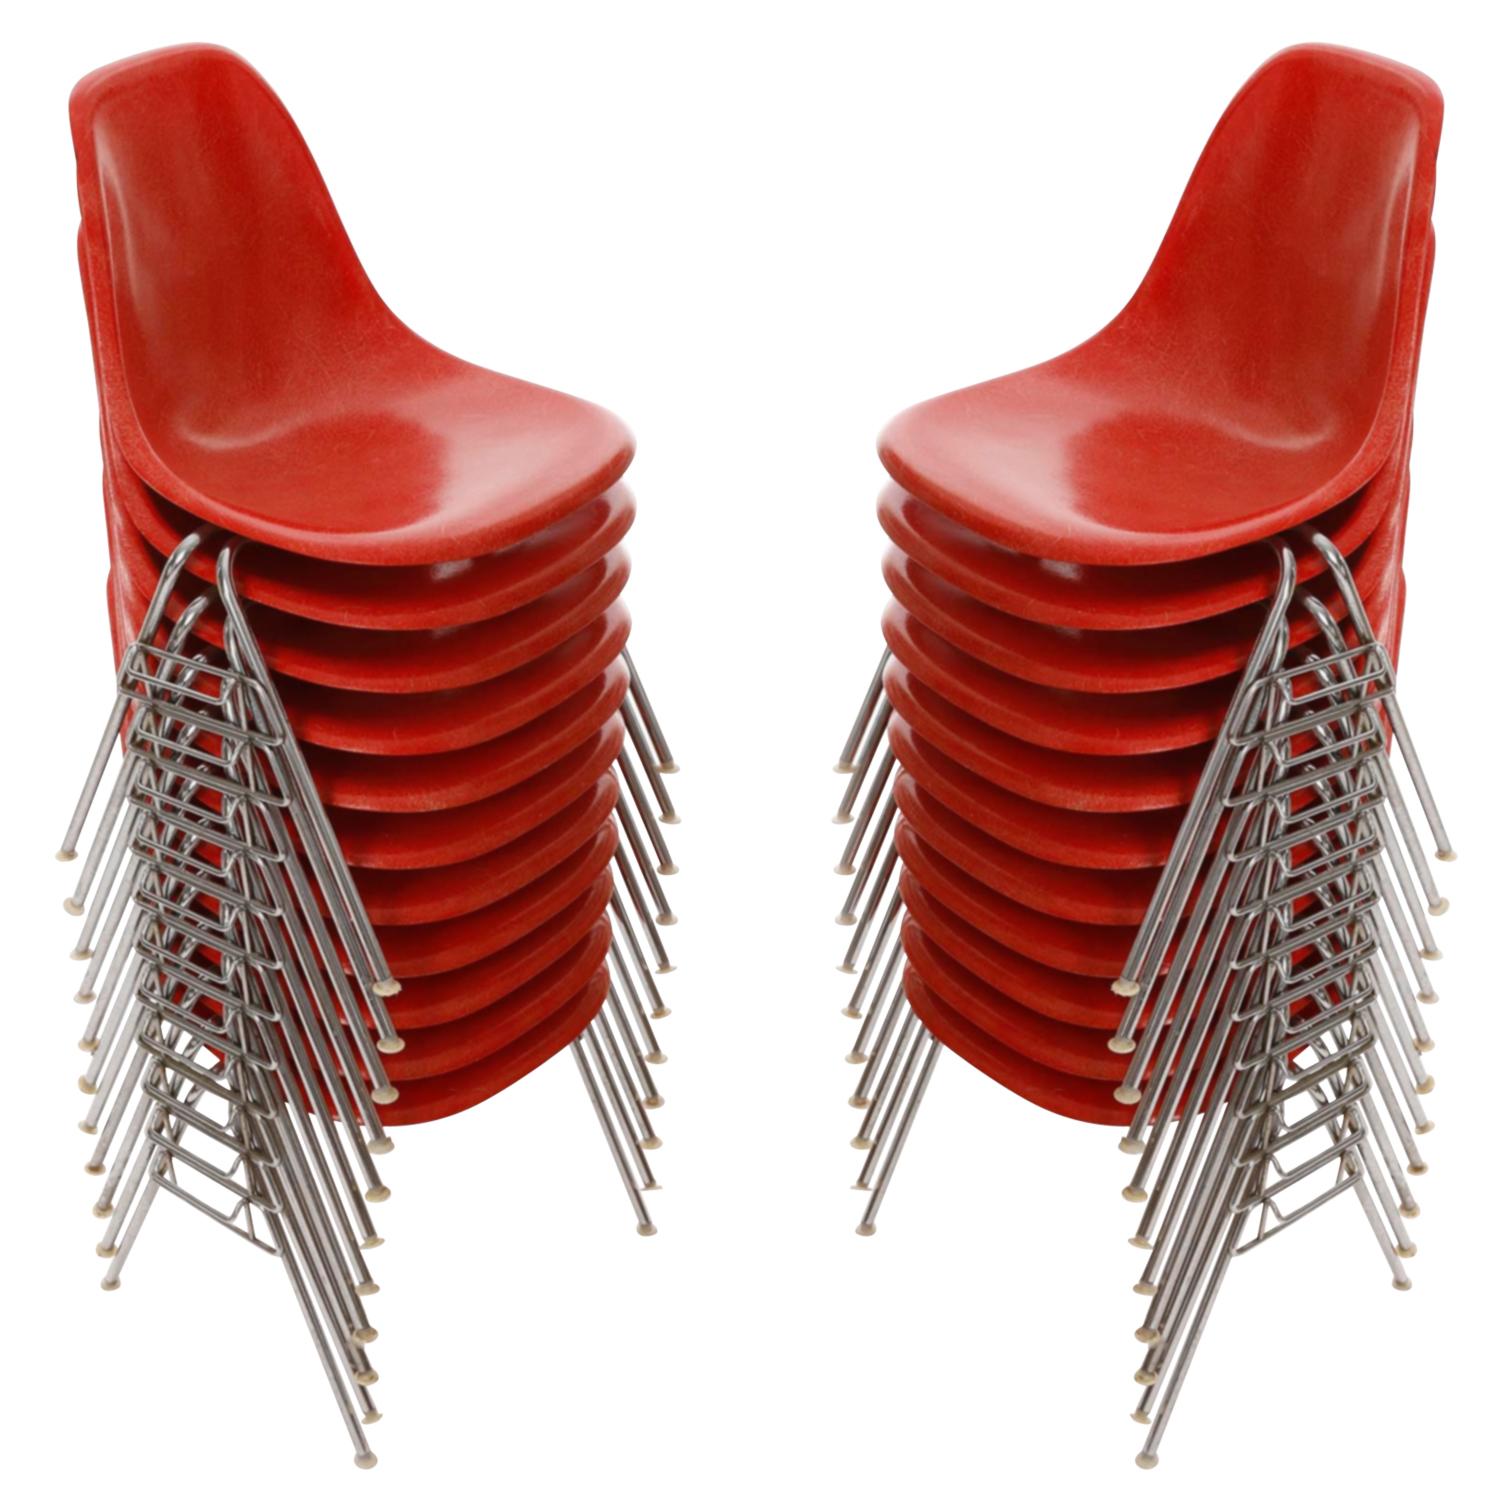 Six Stacking Chairs, Charles & Ray Eames, Herman Miller, Red Fiberglass, 1974. For Sale 1